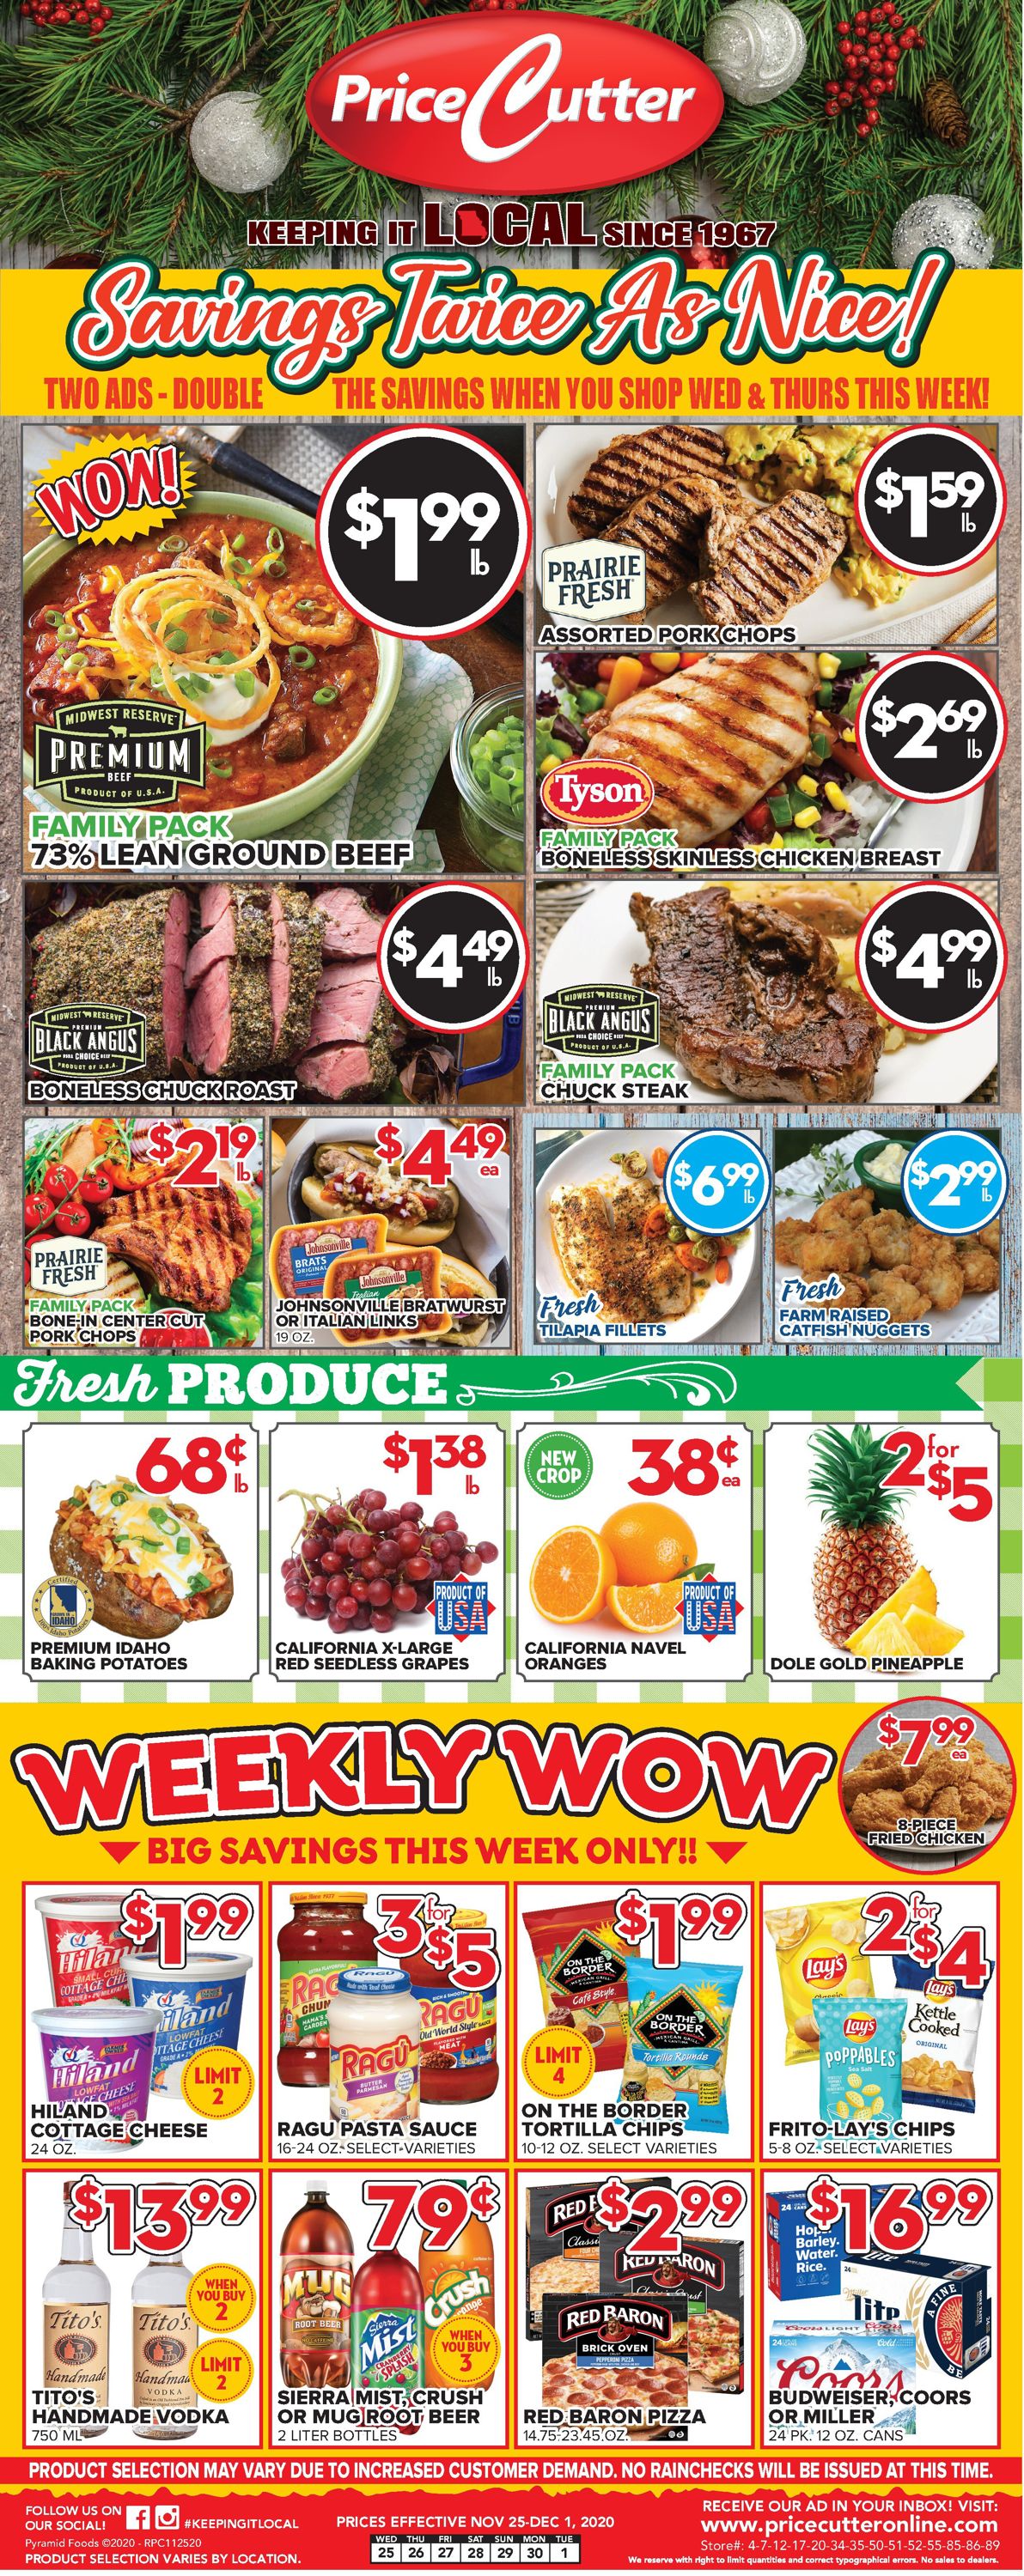 Price Cutter Thanksgiving 2020 Weekly Ad Circular - valid 11/25-12/01/2020